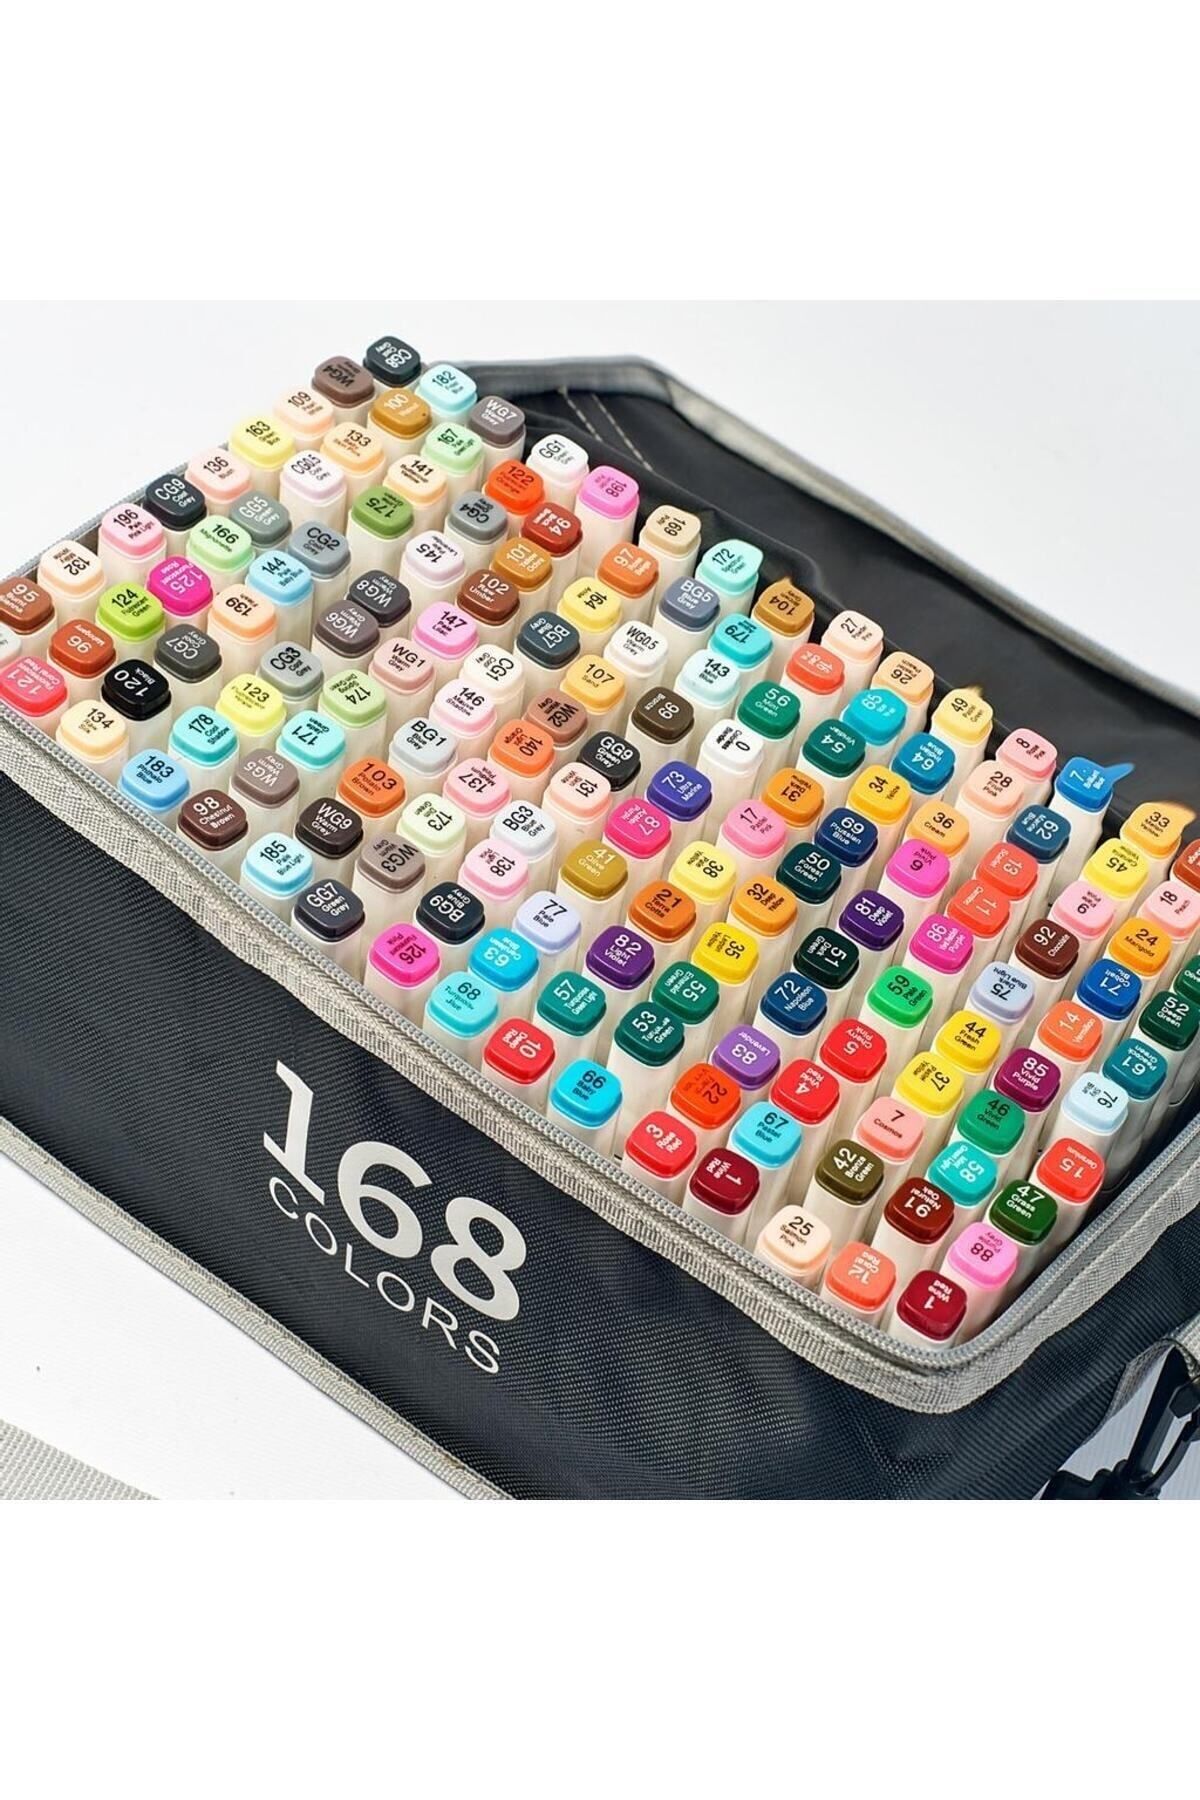 TOUCH COOL Fine Art Markers 168 Colors Bag Hardcase Tray Set - Now